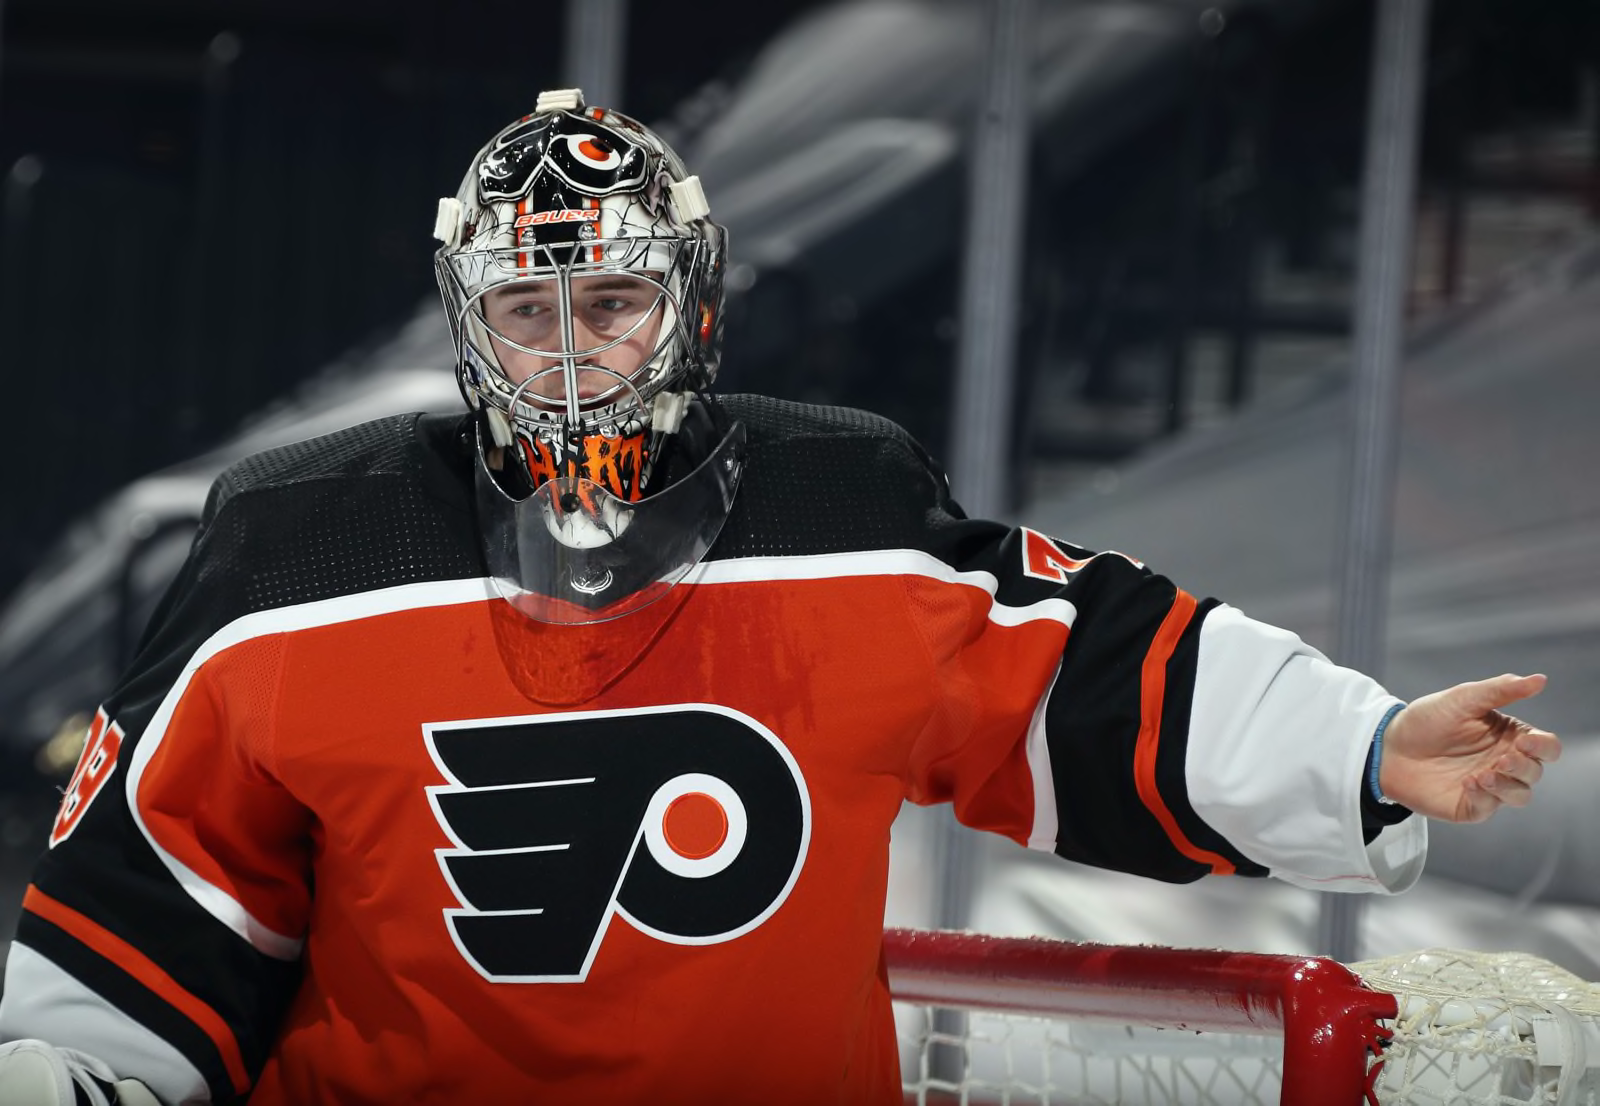 Ron Hextall faces Flyers' future, forward trade rumors, with